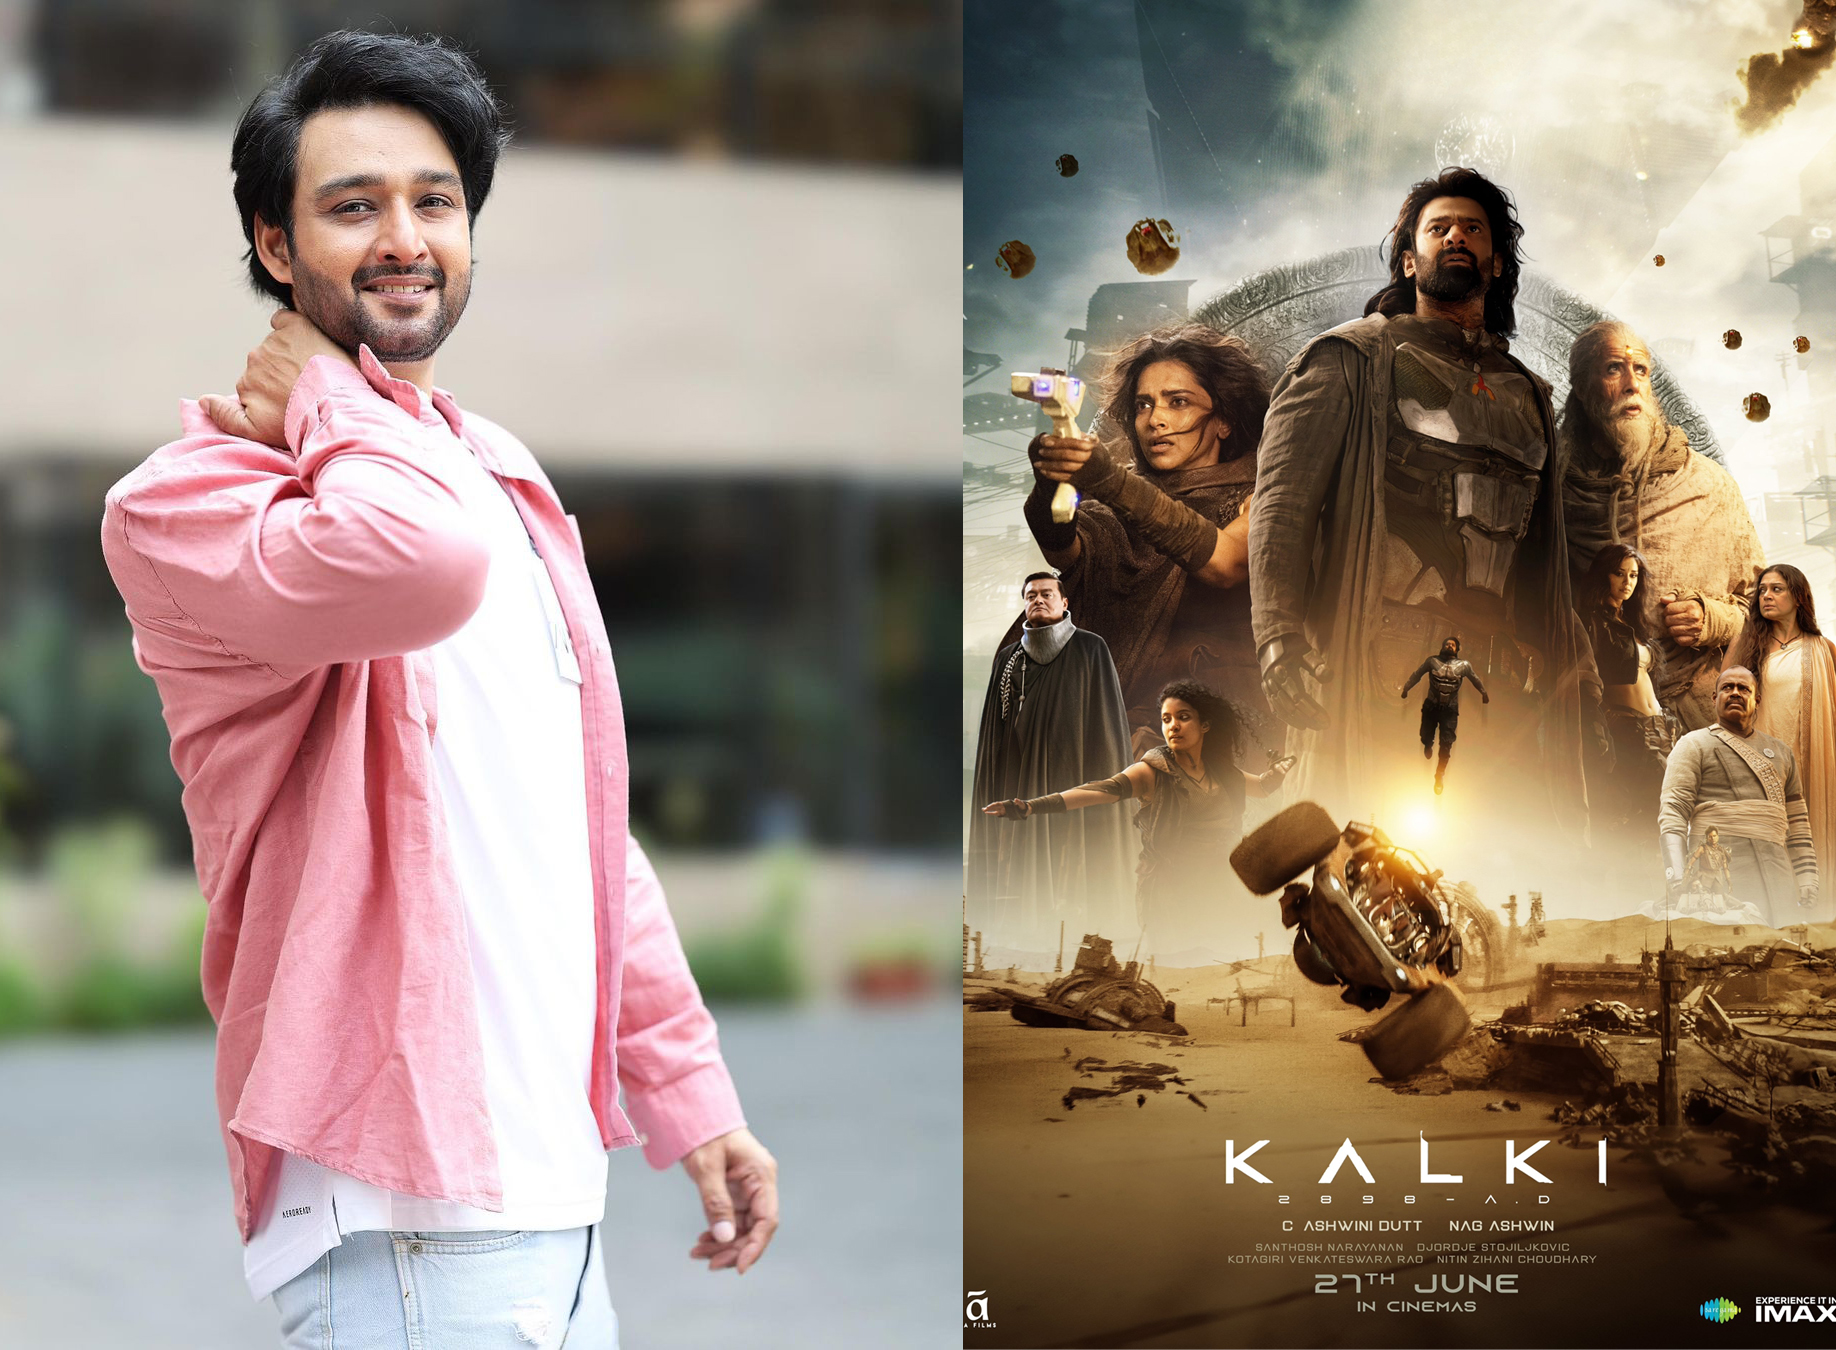 Our Mahabharat Fame Actor Sourabh Raaj Jain Admires This Legendary Actor’s Performance In The Kalki 2898 Ad. Let’s Check Out It!